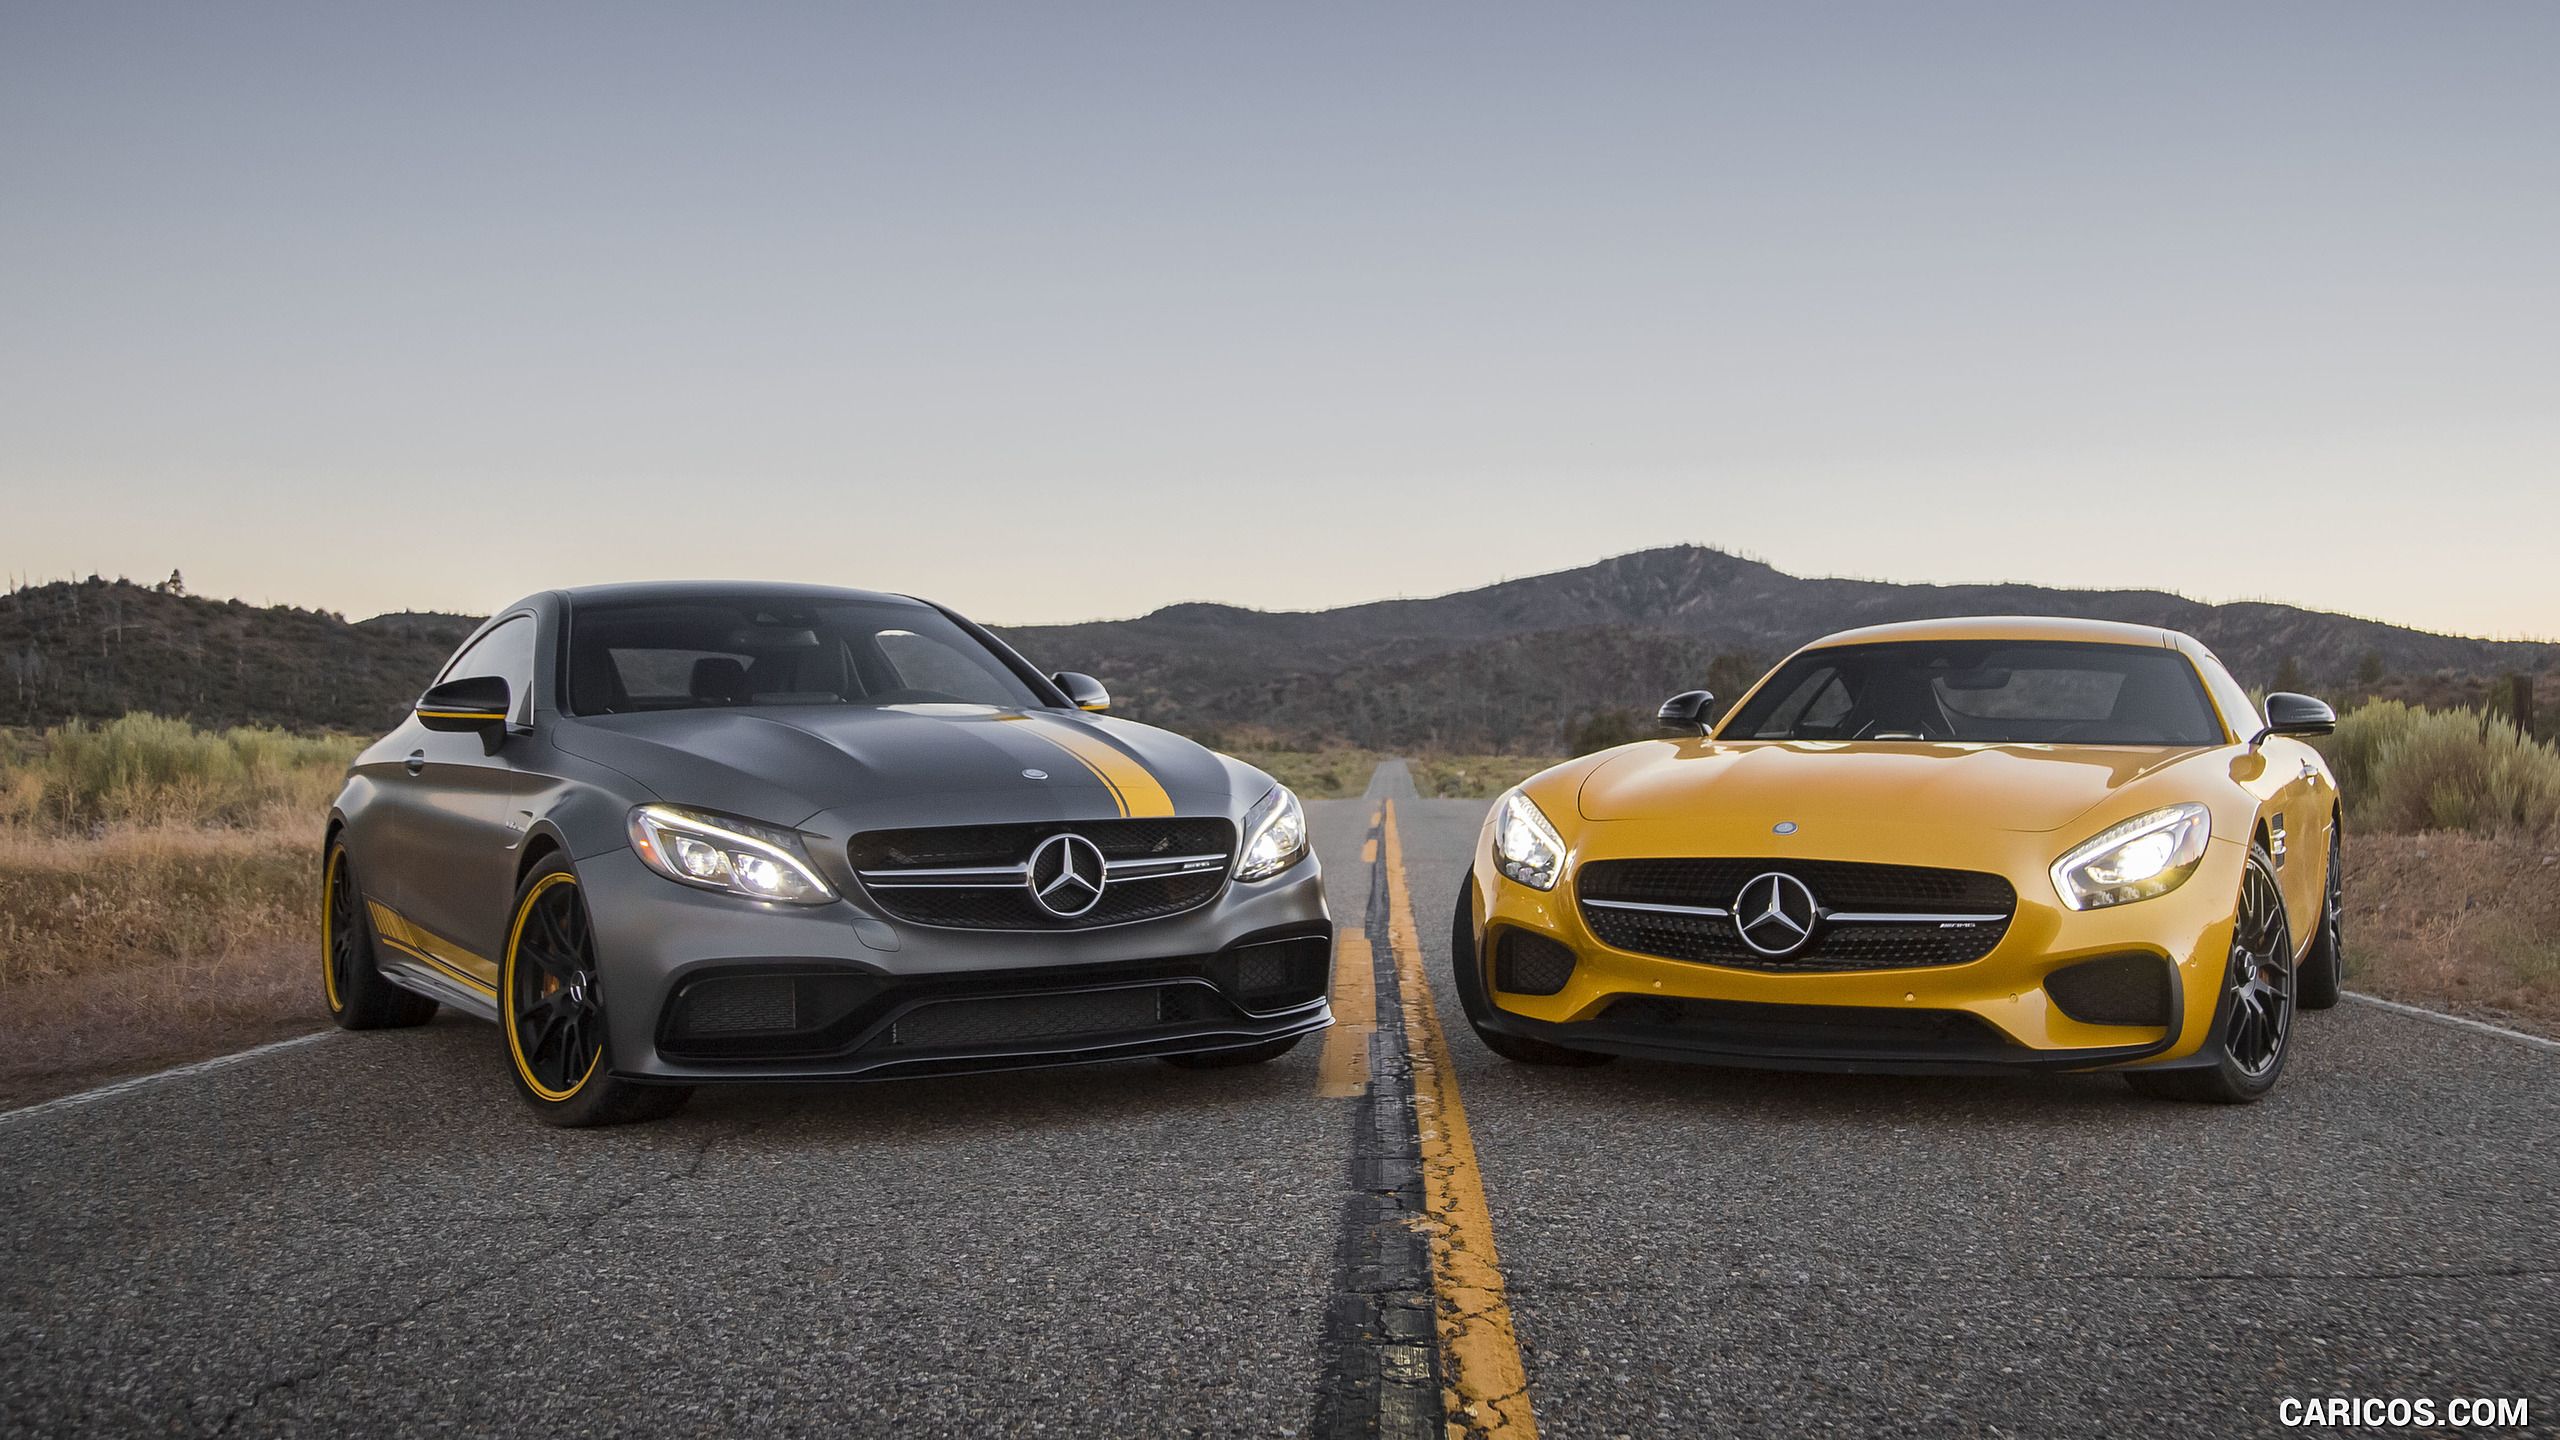 Mercedes AMG C63 S Coupe Edition One (US Spec) And 2017 Mercedes AMG GT S Coupe. HD Wallpaper